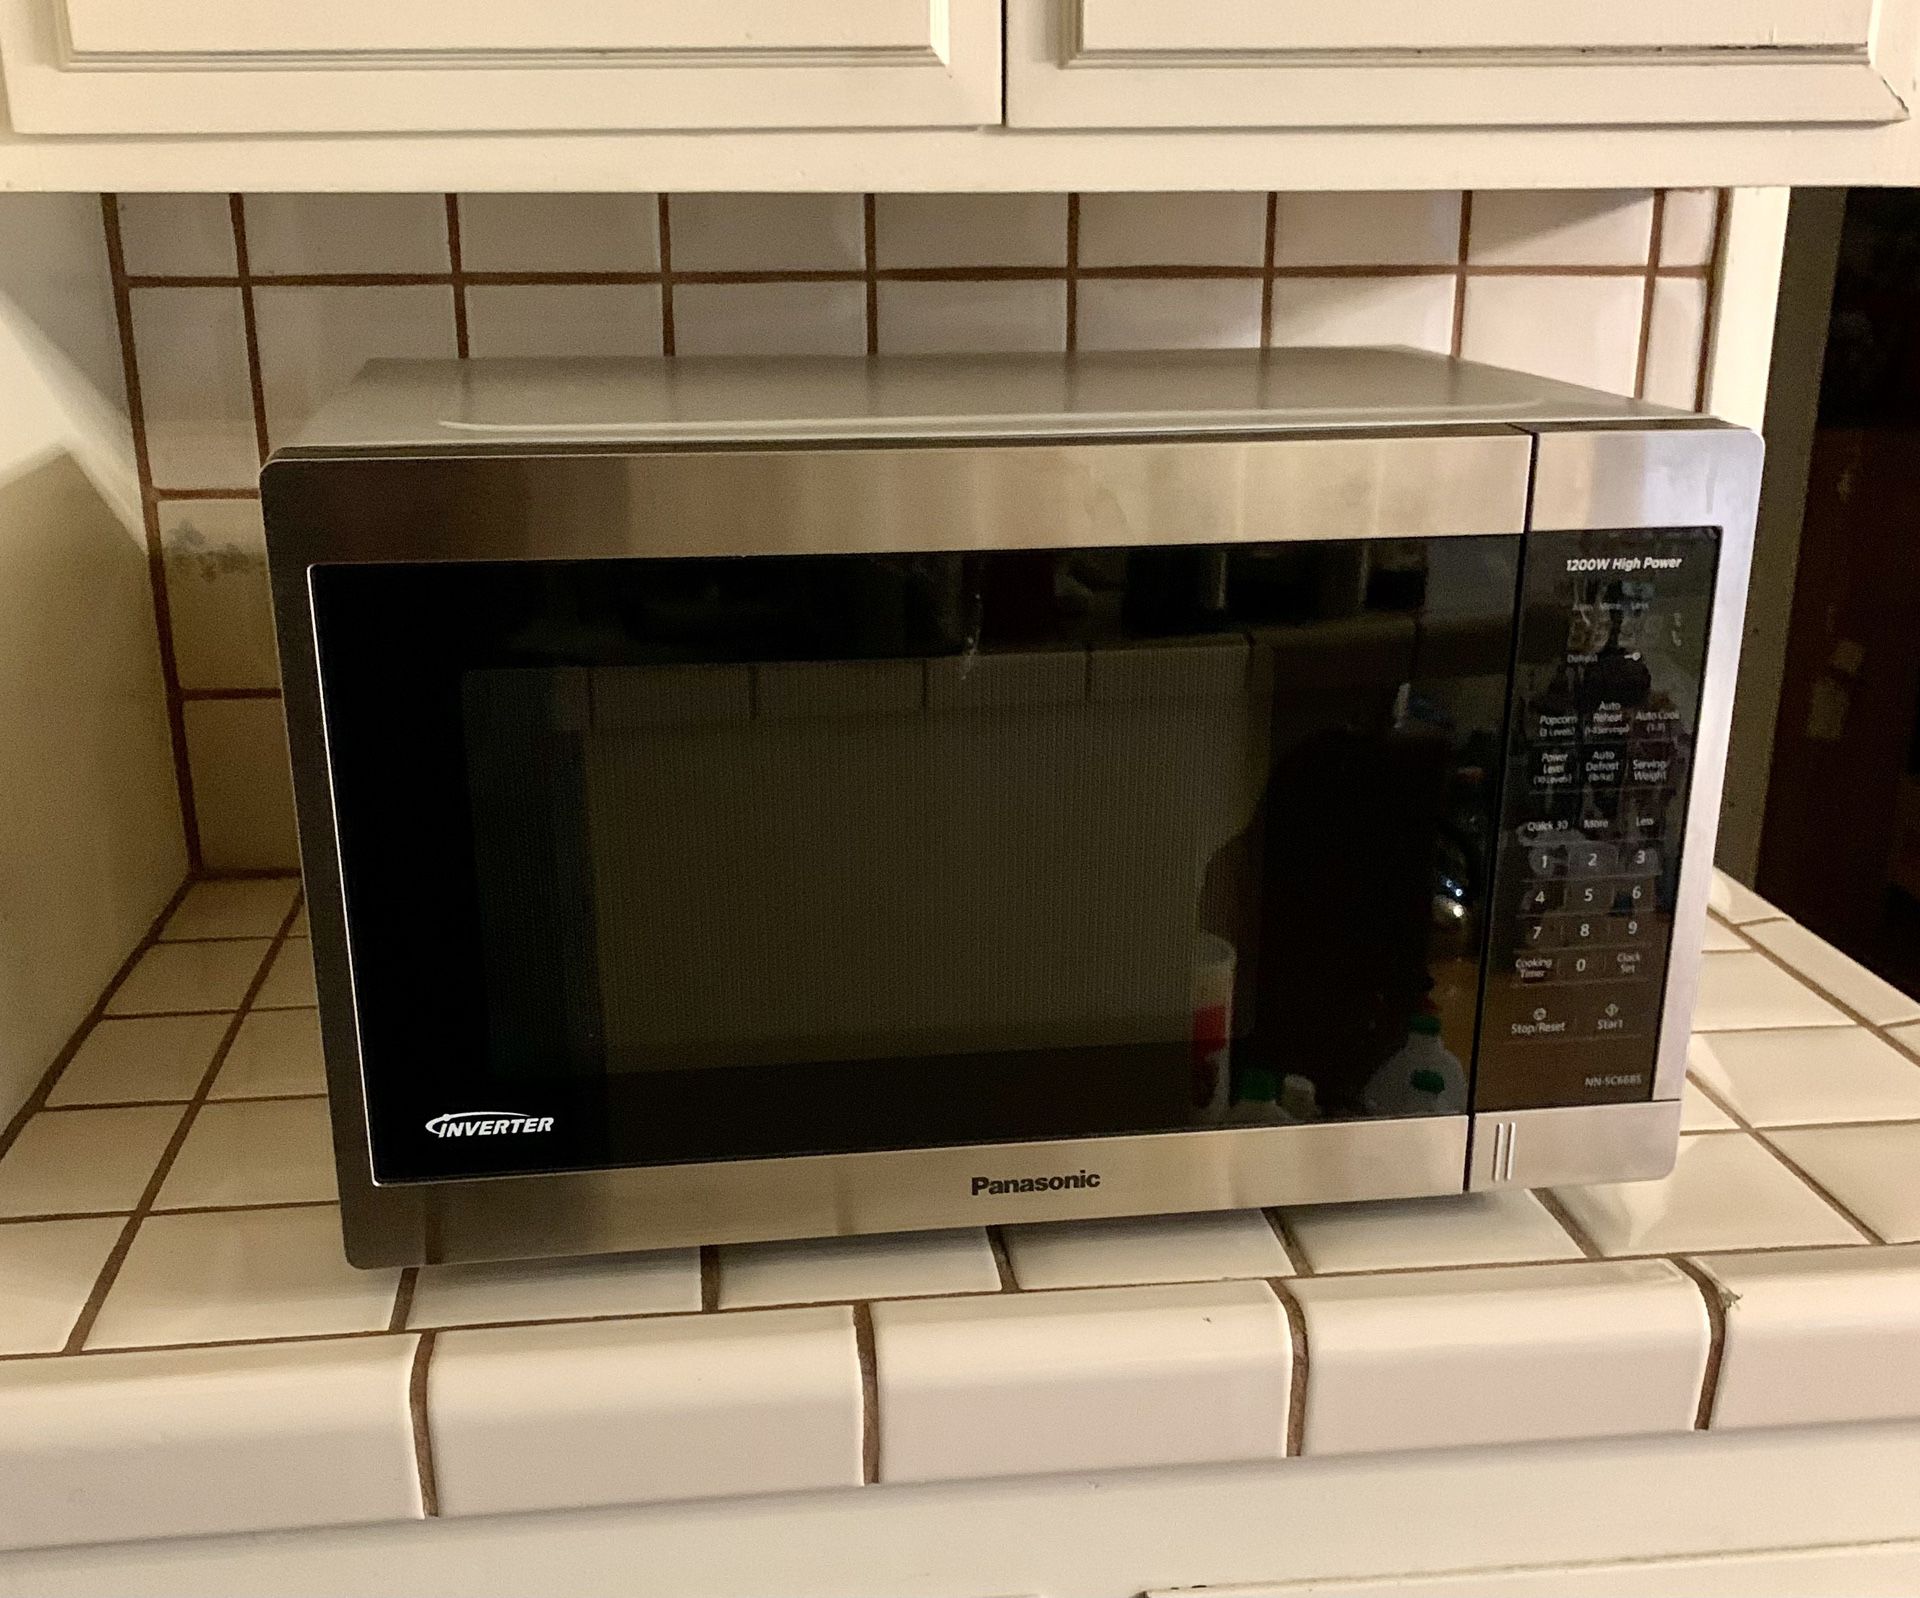 Summit Compact Microwave, Stainless Steel – Universal Companies